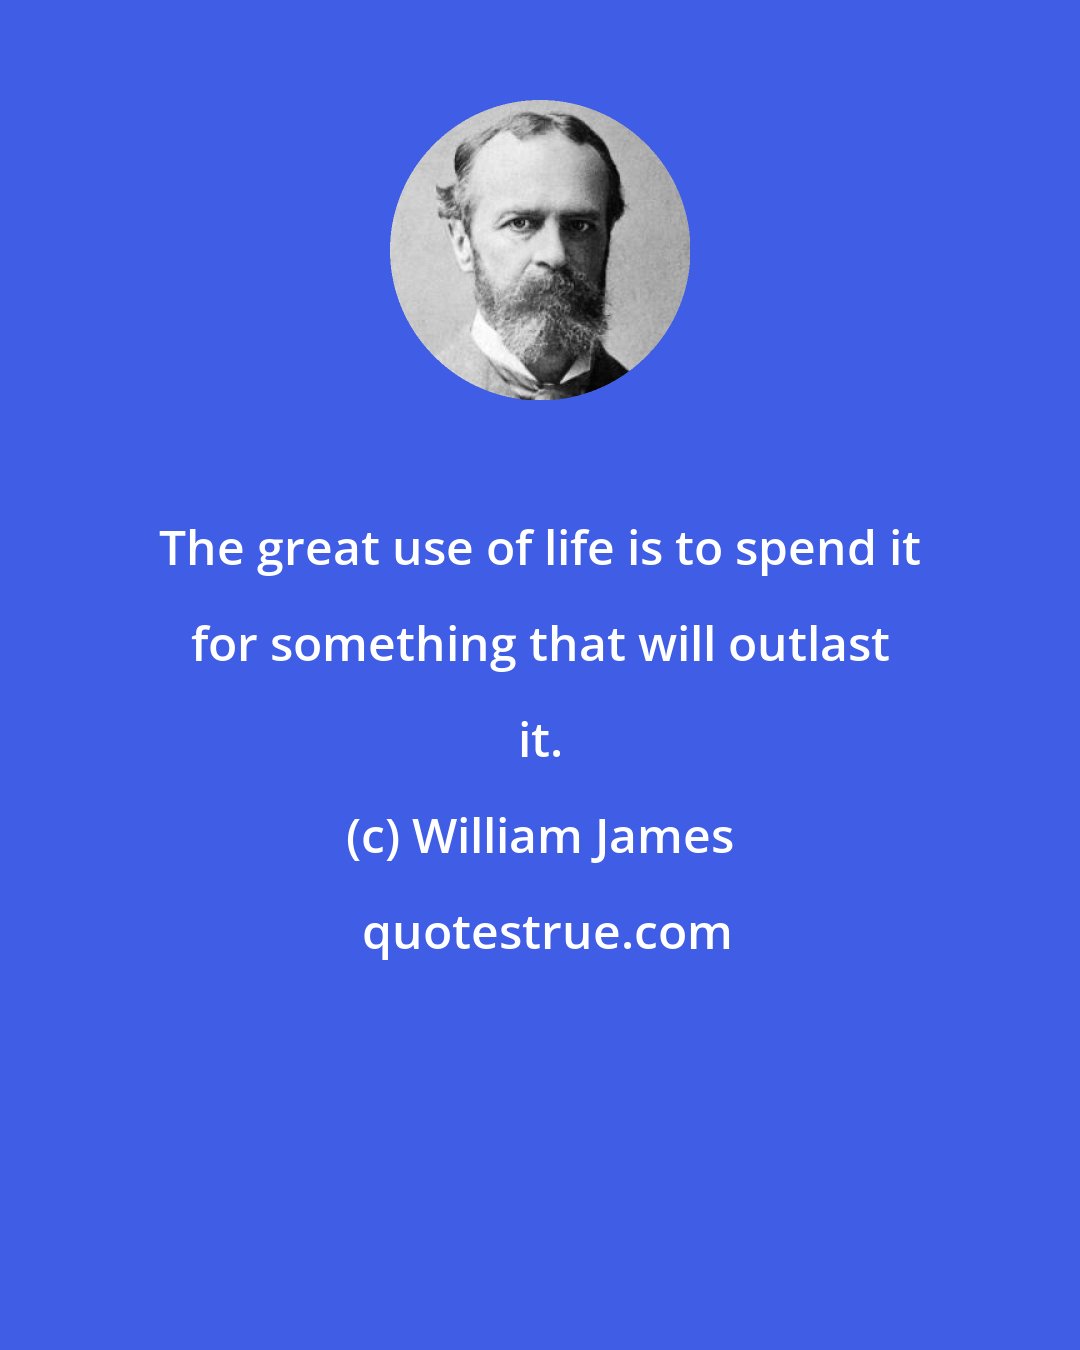 William James: The great use of life is to spend it for something that will outlast it.